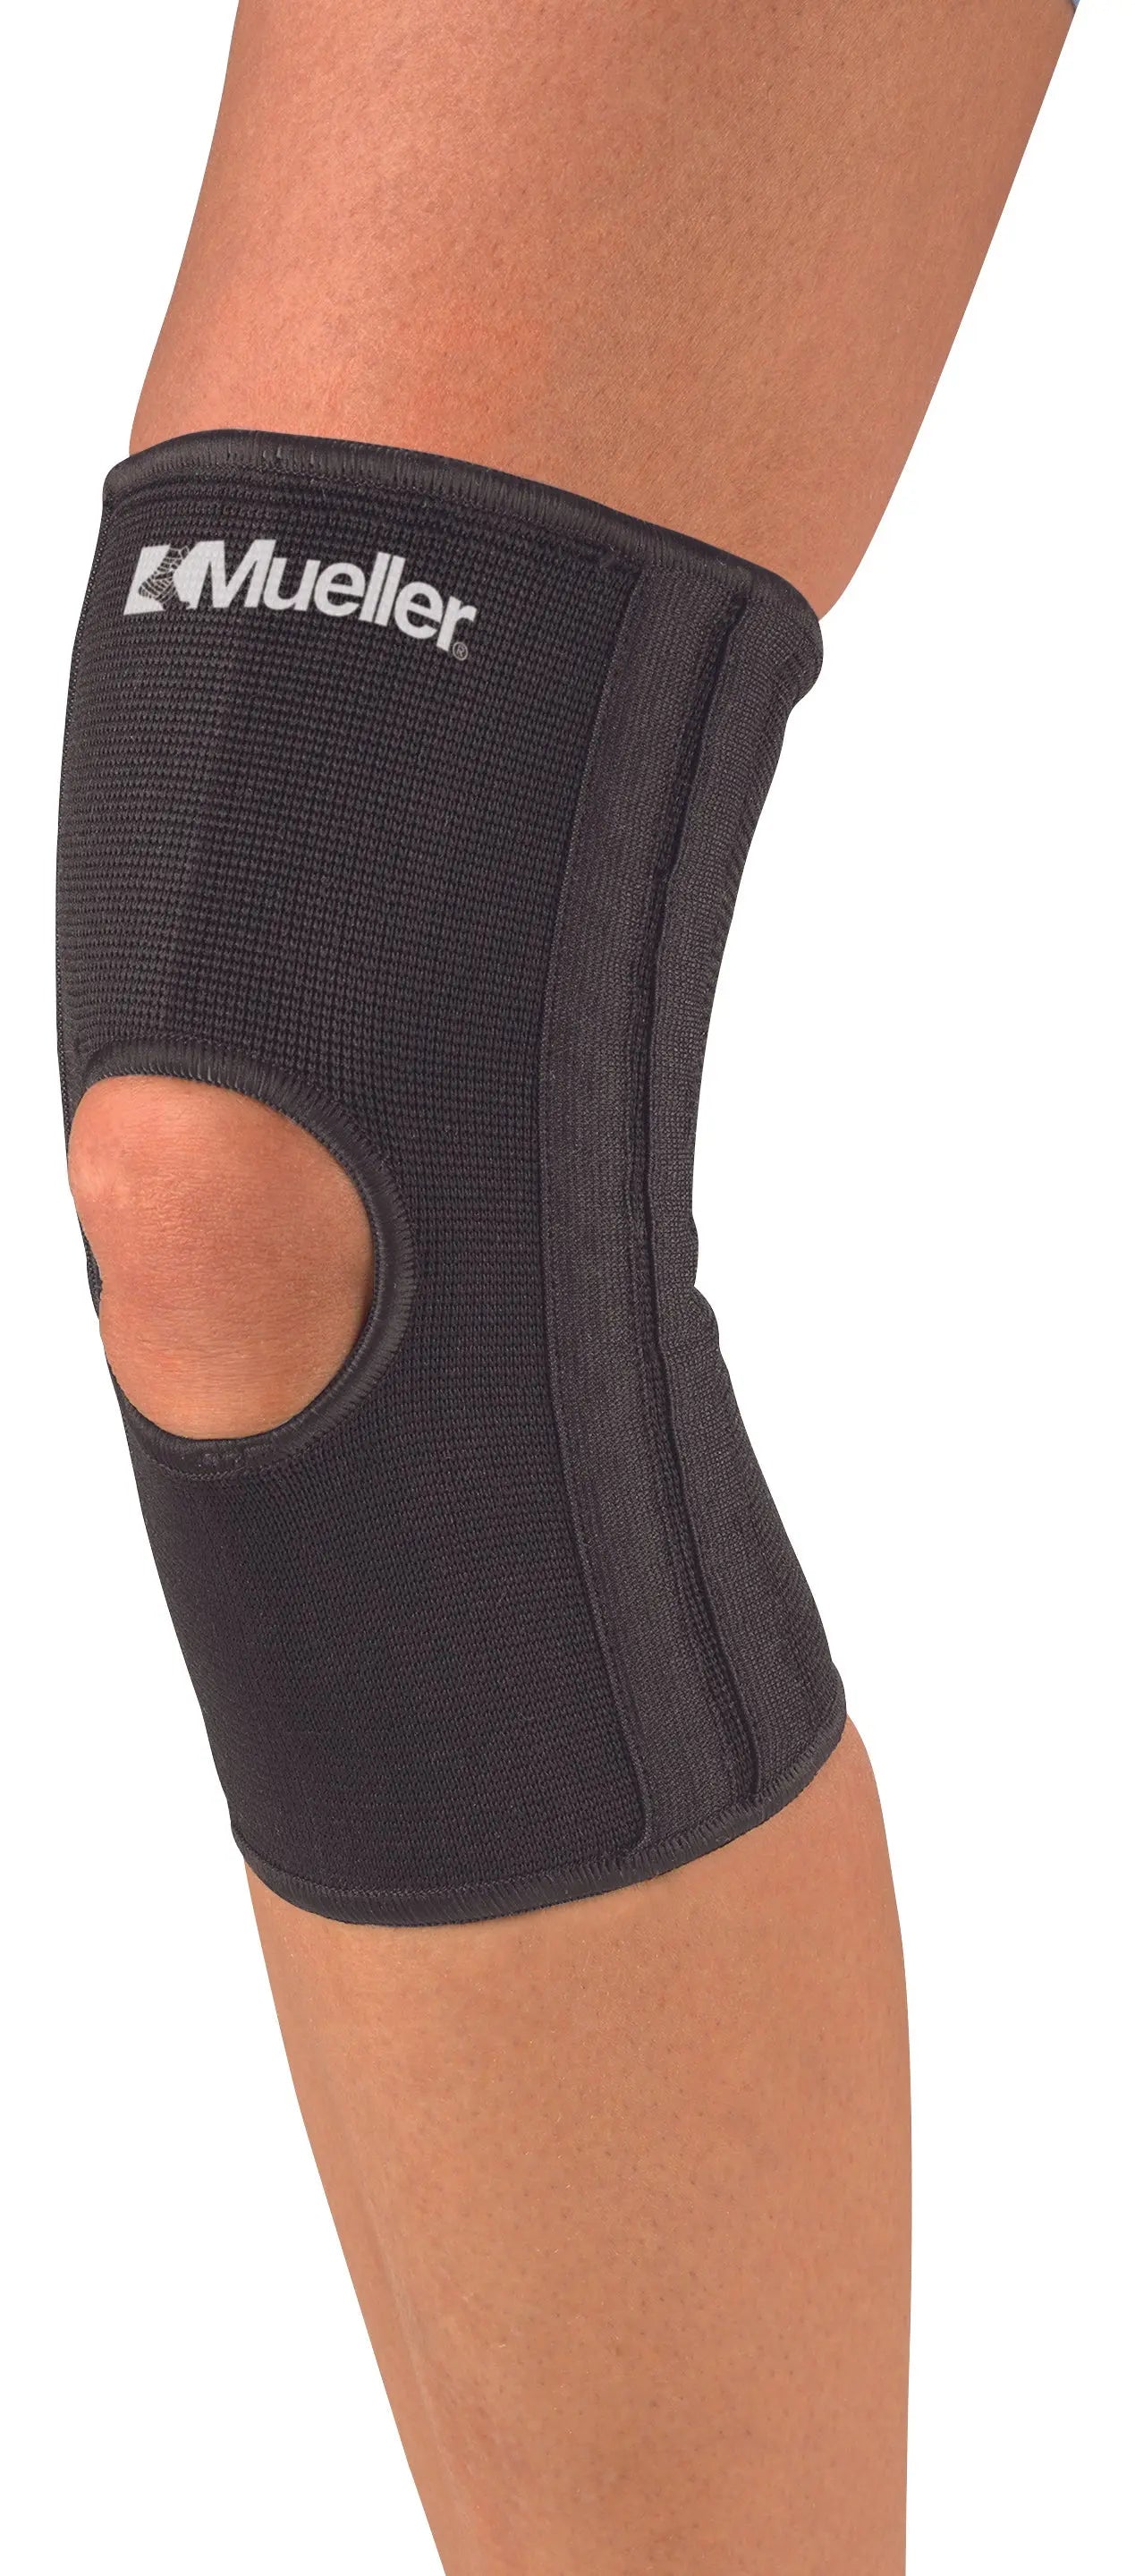 Mueller Elastic Knee Support, Black, Small - Home Health Store Inc